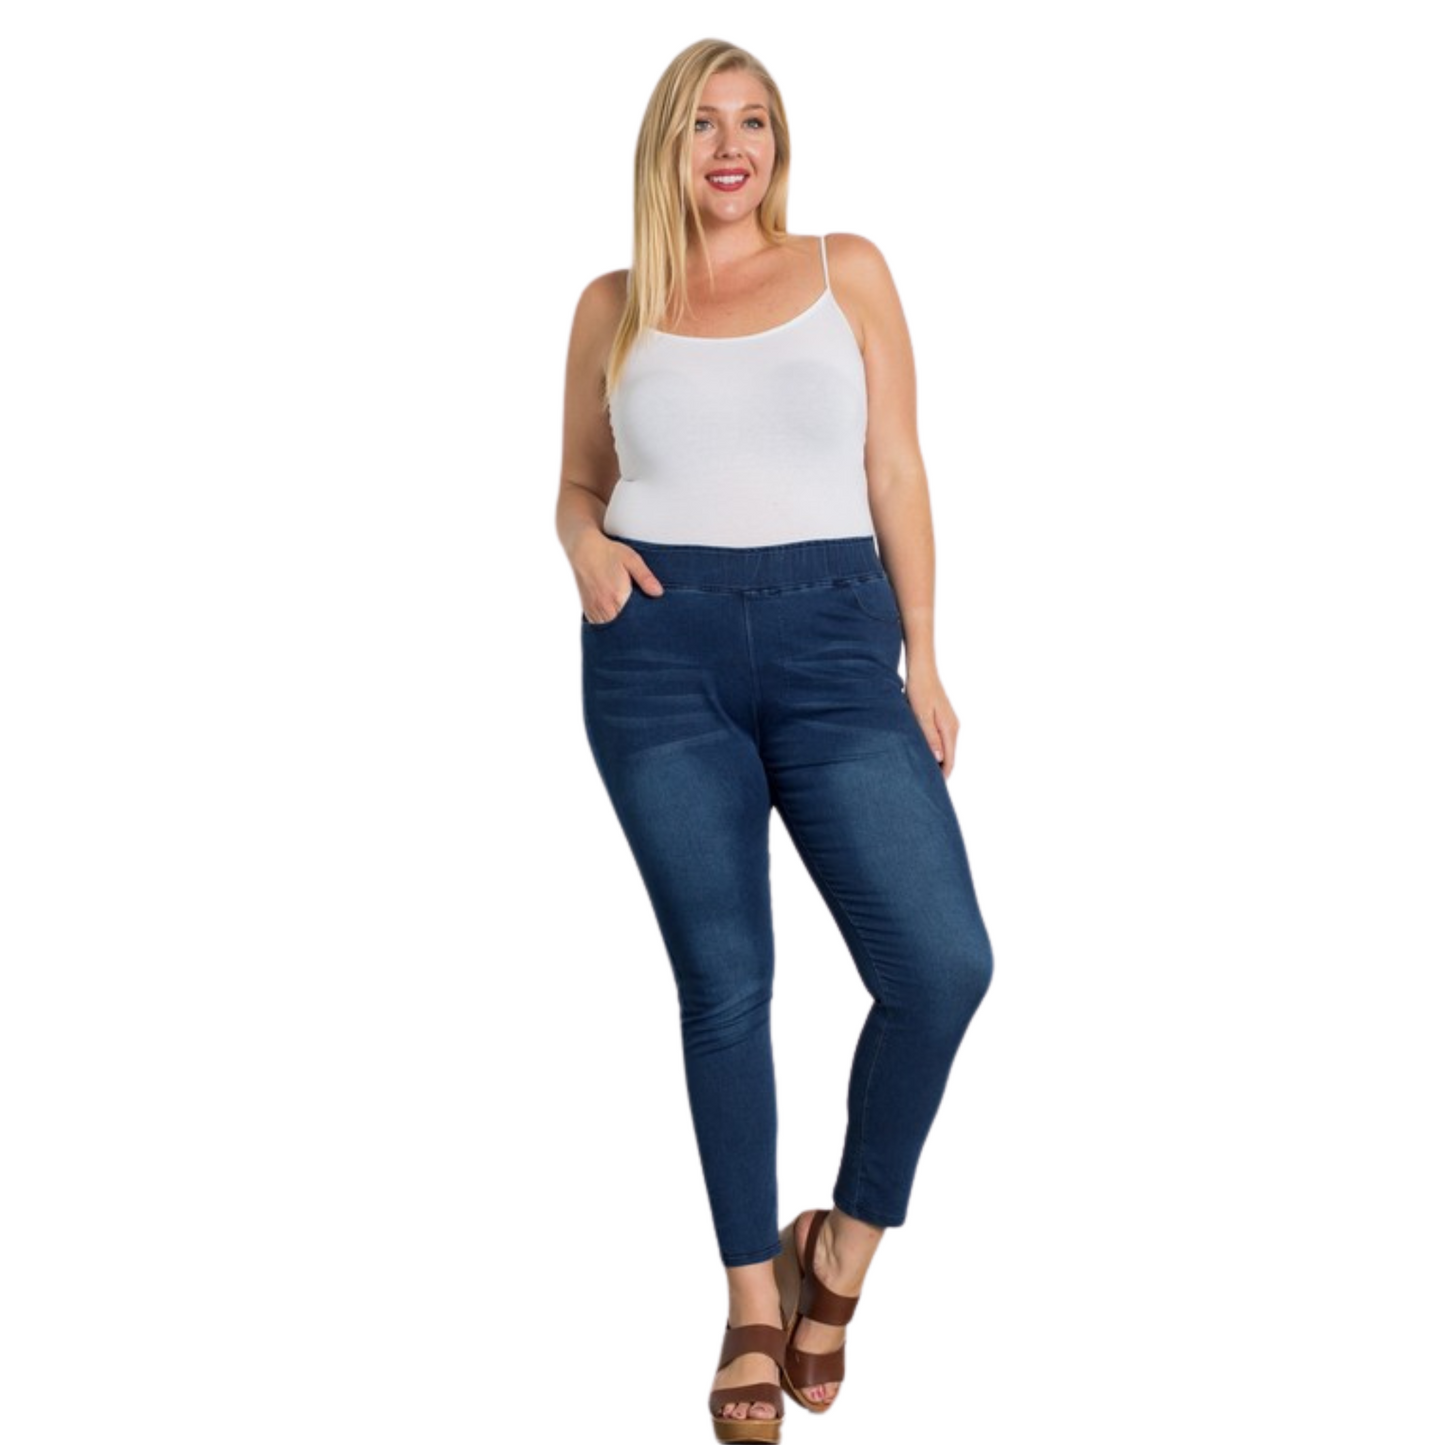 These plus size High Waisted Solid Jeggings offer a comfortable and stylish fit with an adjustable elastic waistband. The jeggings pull on effortlessly, made with a skinny distressed look for a modern, fashionable touch. Perfect for everyday wear.